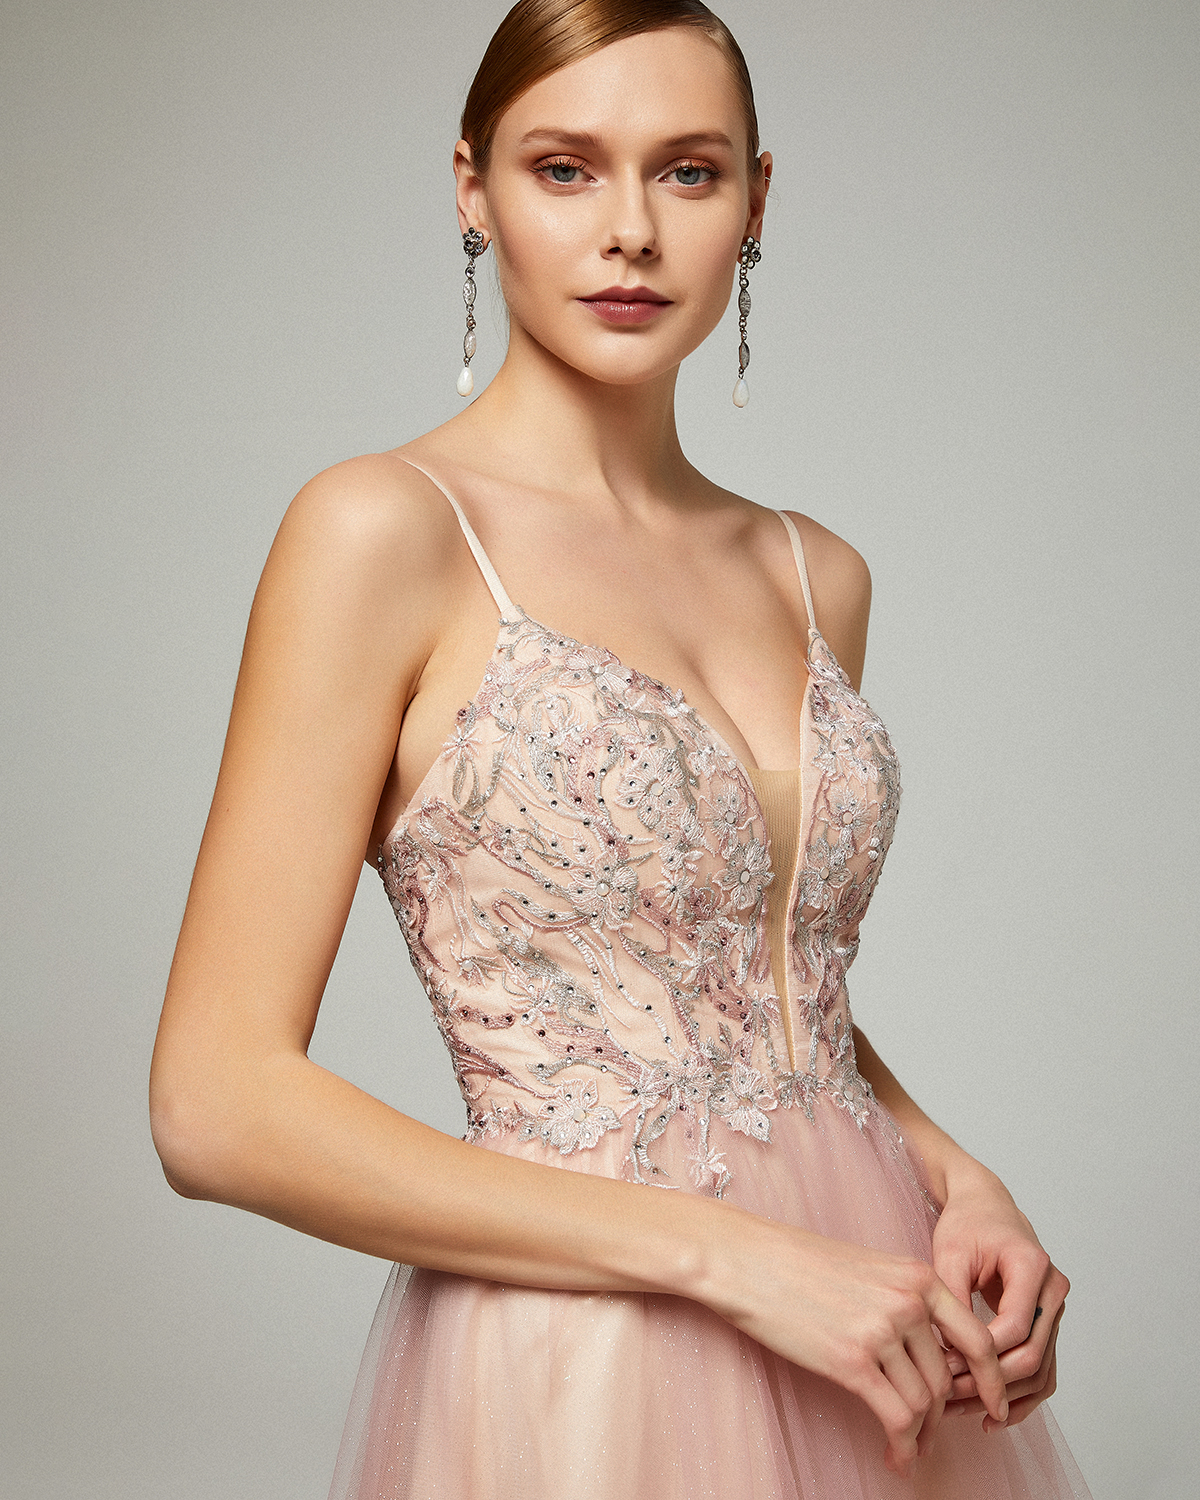 Evening Dresses / Long evening dress with shining tulle fabric,  top with lace and beading